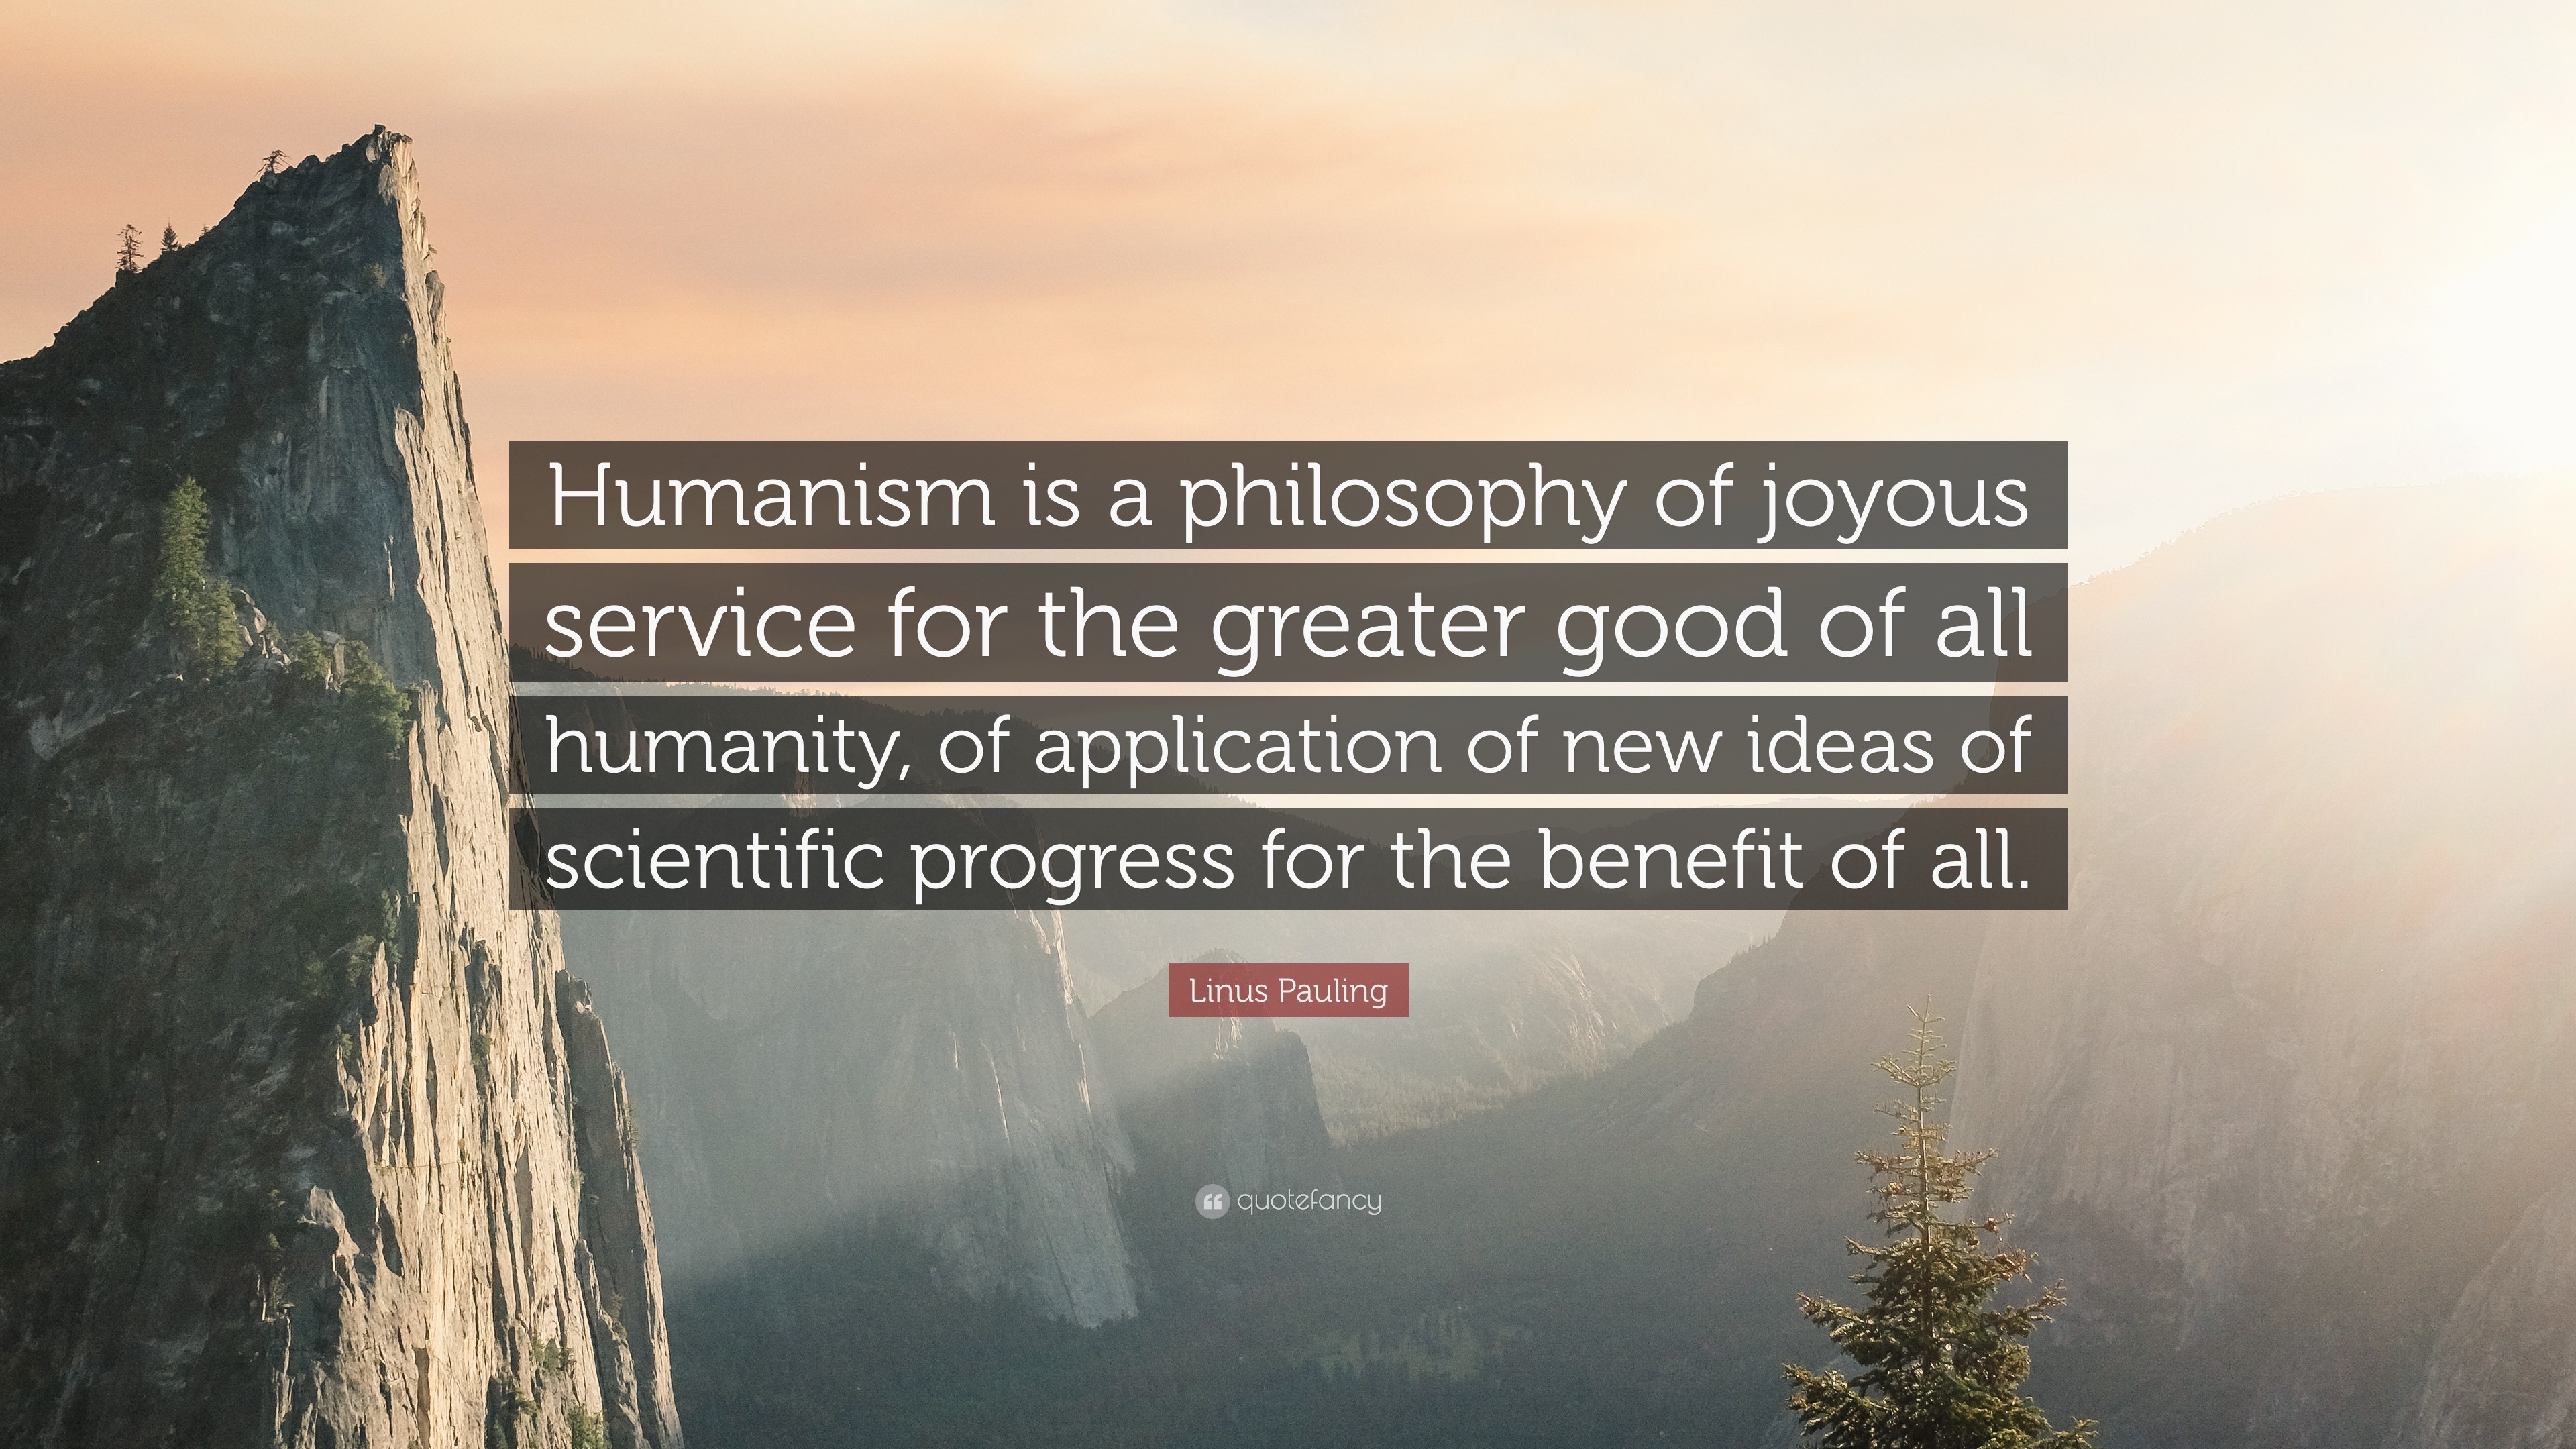 Linus Pauling Quote Humanism Is A Philosophy Of Joyous Service For The Greater Good Of All Humanity Of Application Of New Ideas Of Scientif